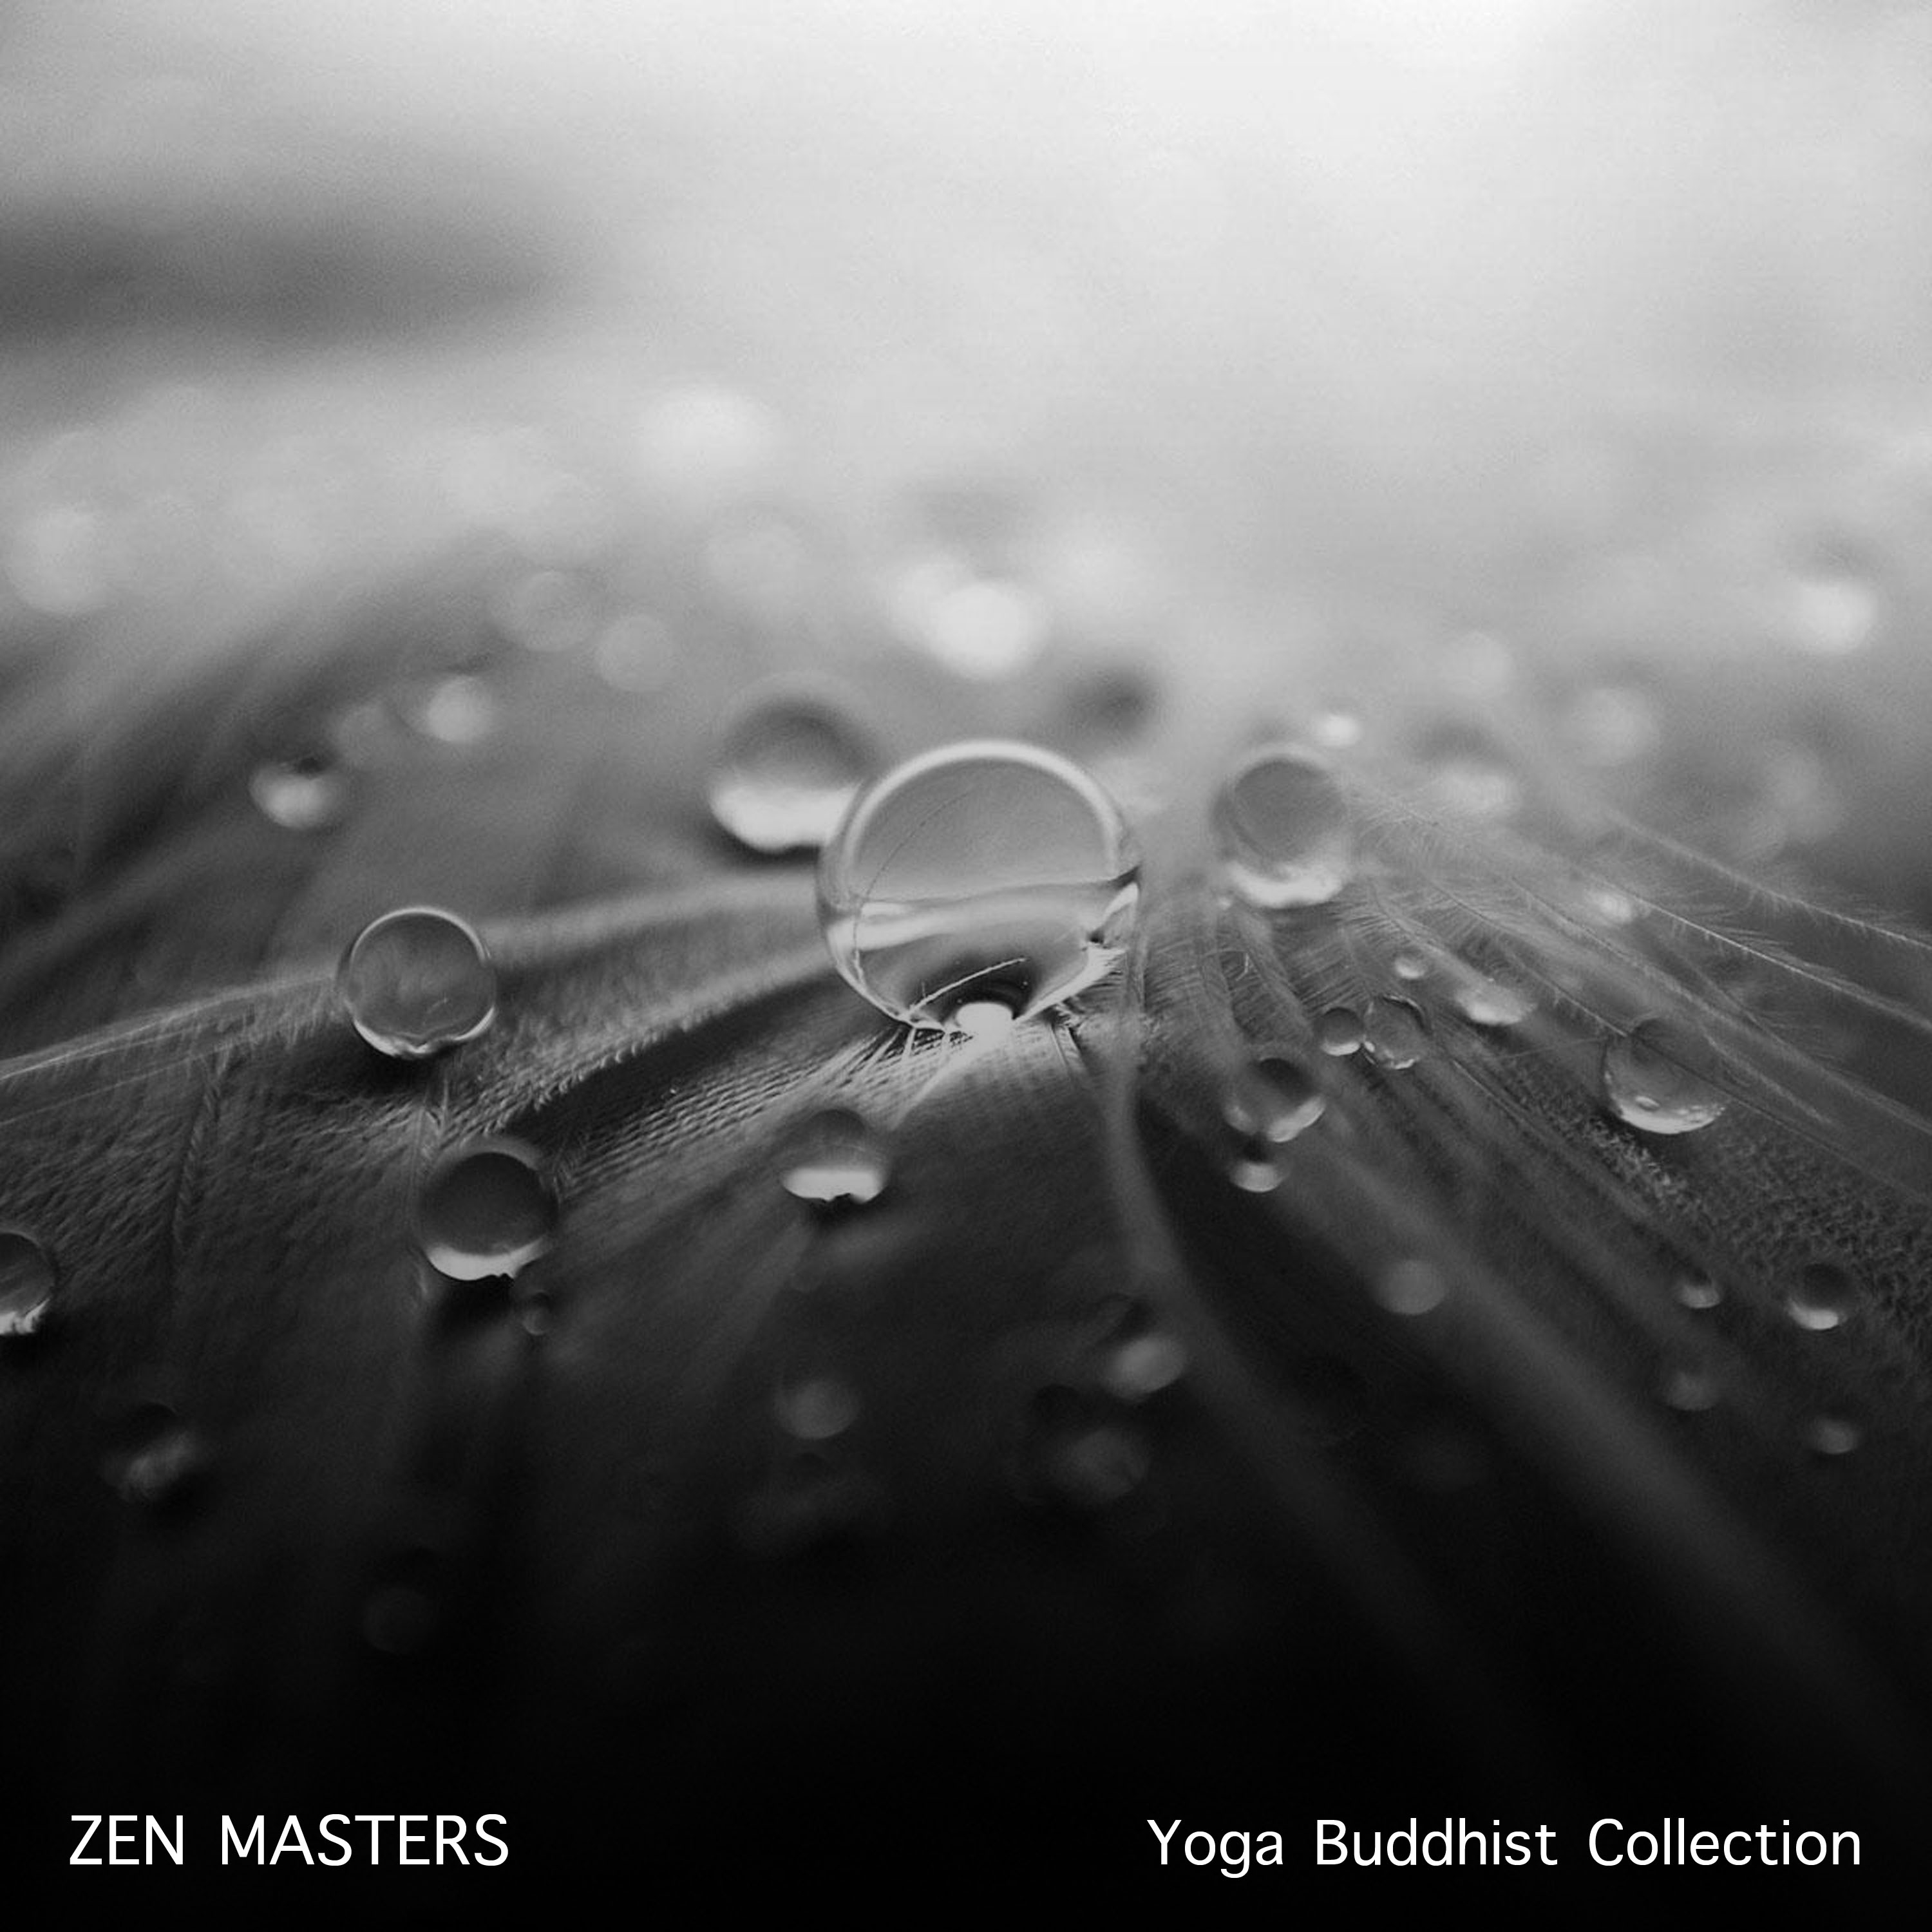 15 Zen Masters Songs: The Yoga Buddhist Collection